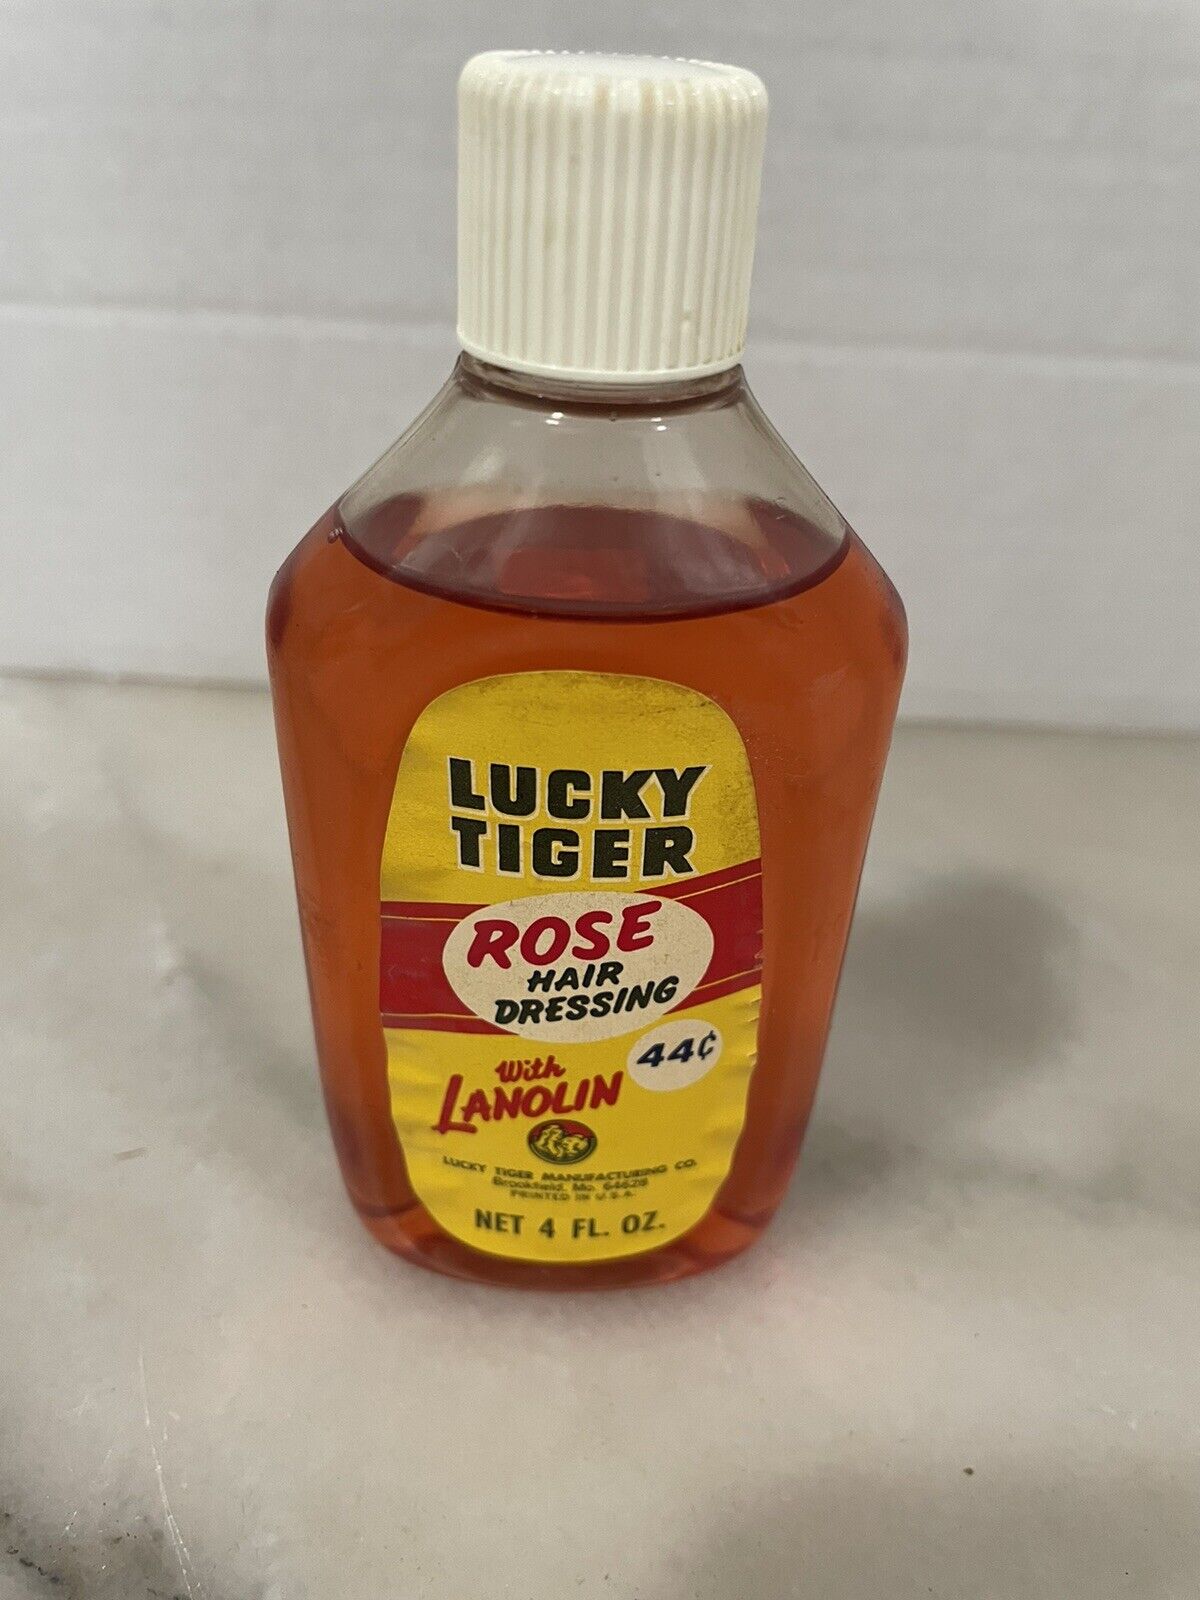 Vintage Lucky Tiger Rose Hair Dressing with Lanolin